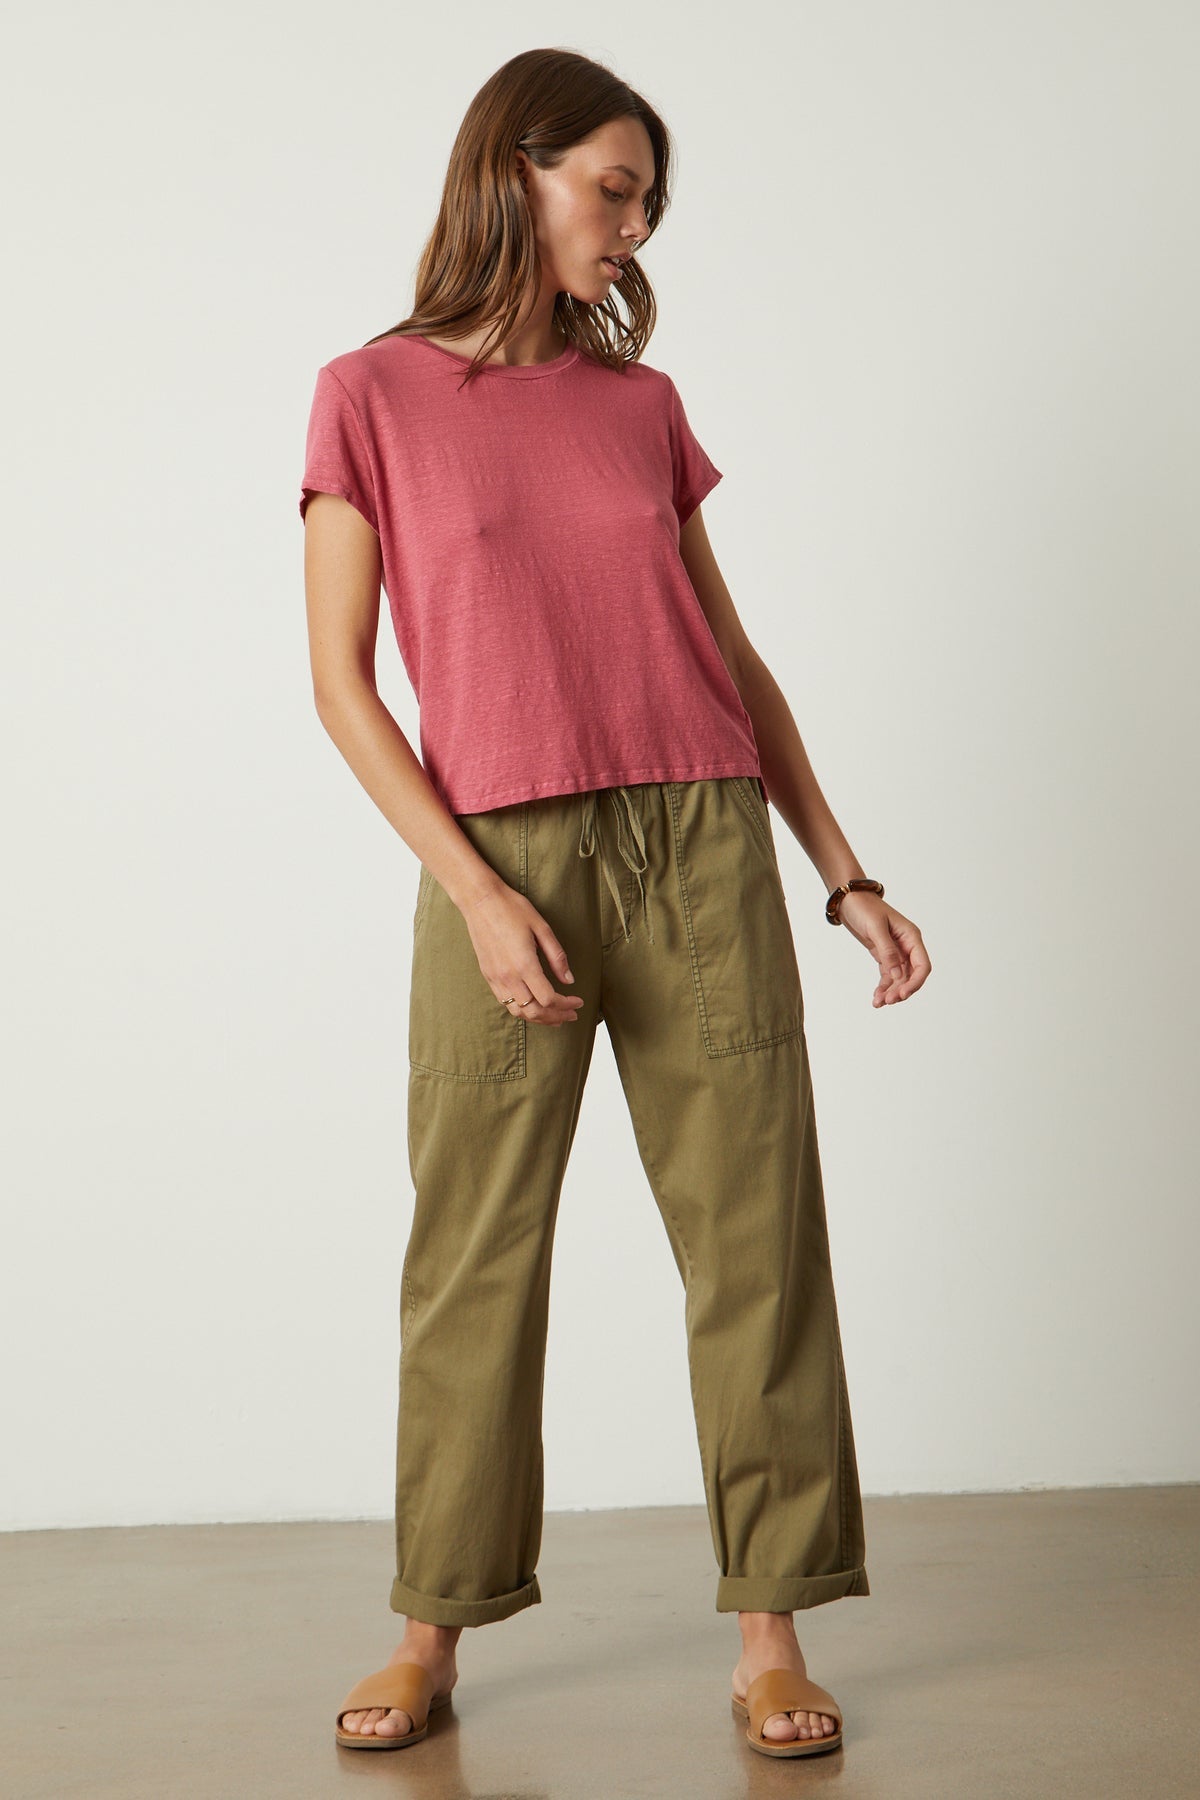 Misty Pant in forest twill and Casey Tee in Calypso dark pink full length front-26496414548161